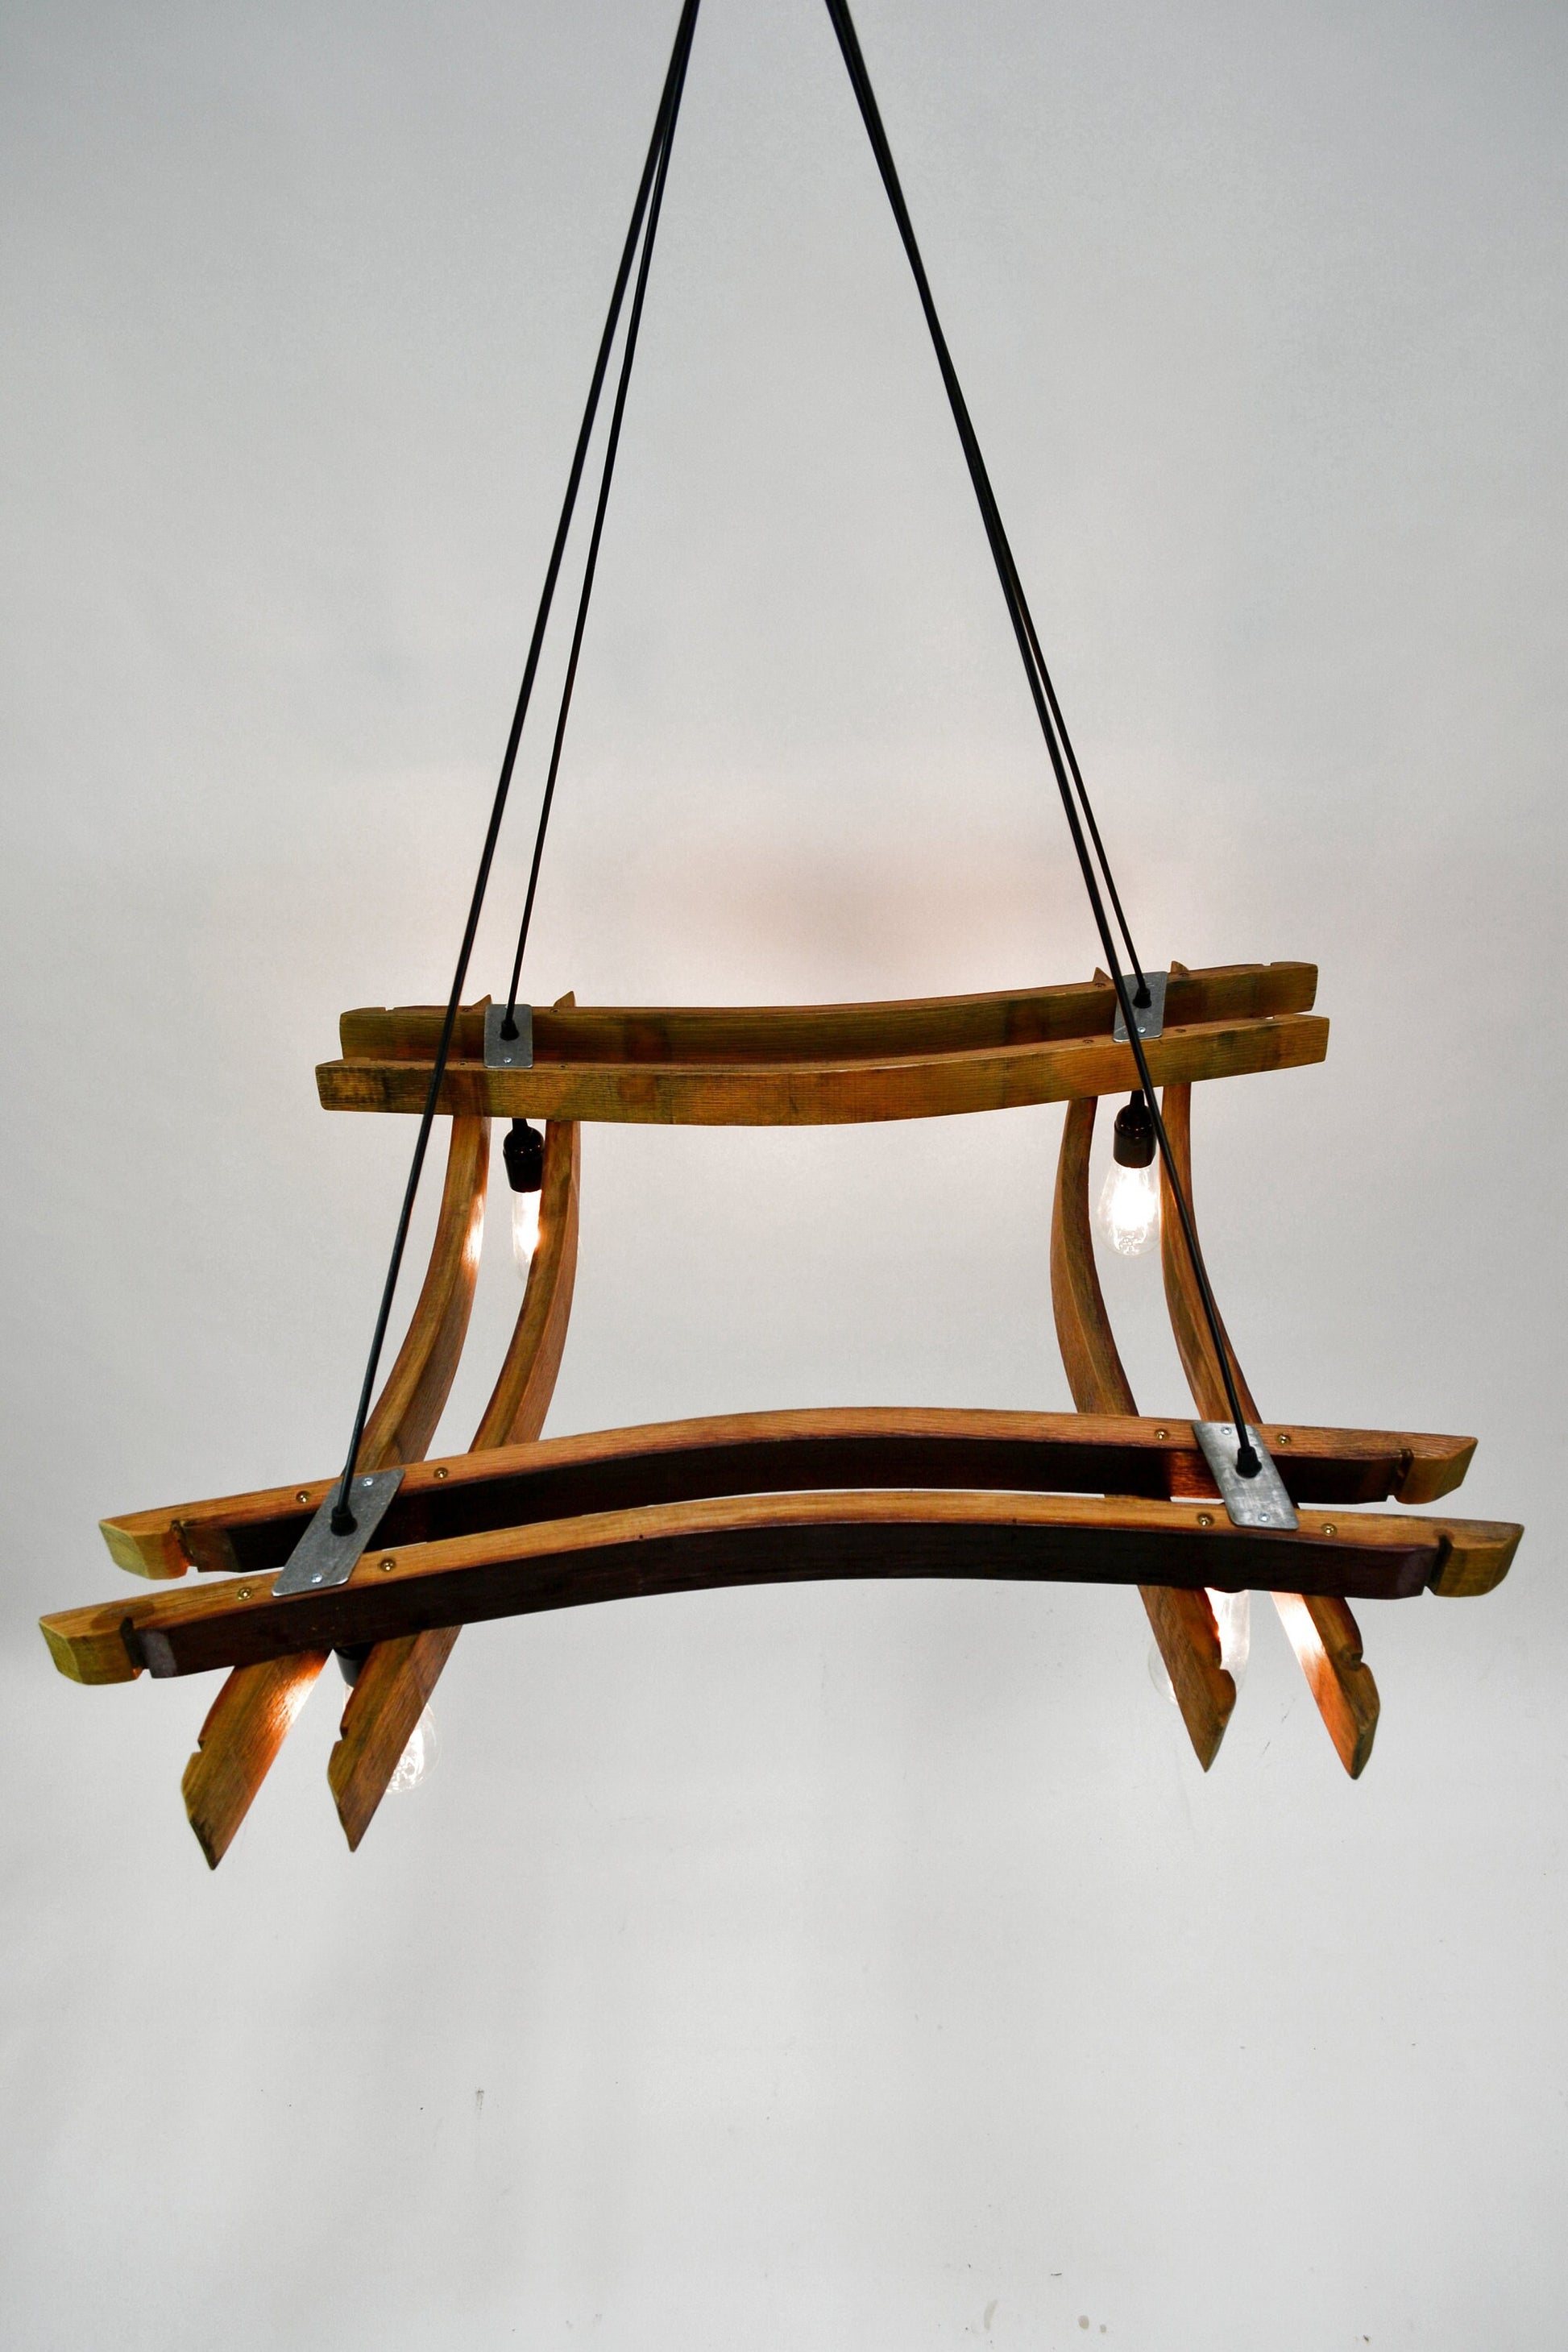 Wine Barrel Stave Chandelier - Artessa - Made from retired California wine barrels. 100% Recycled!